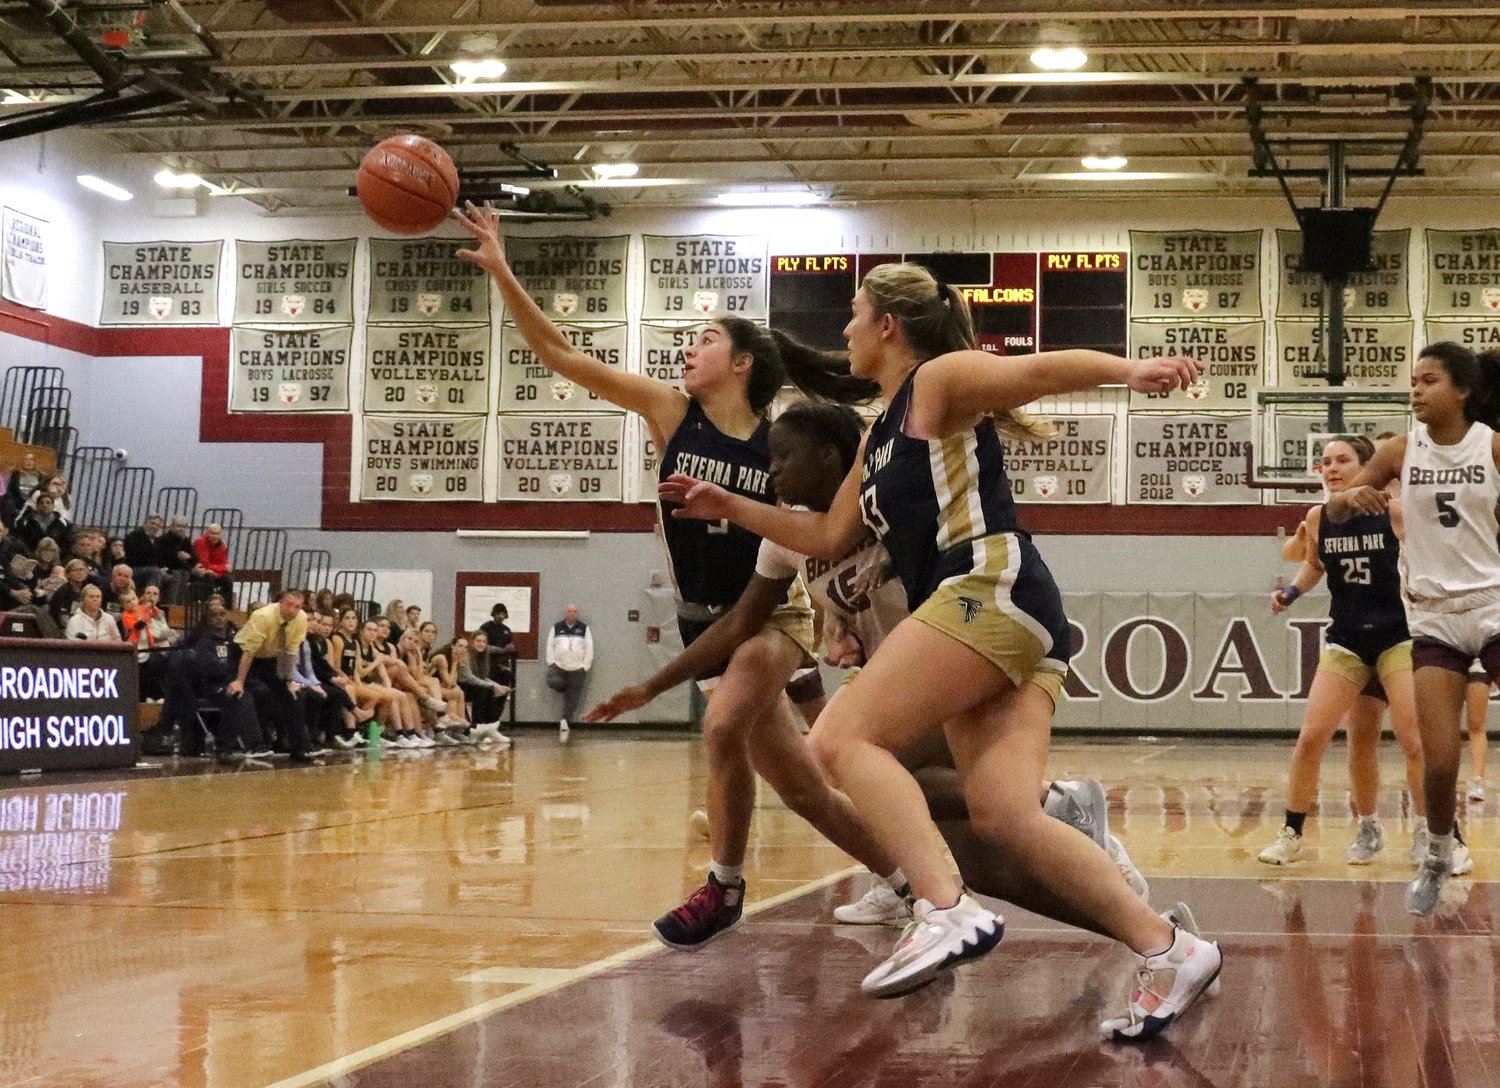 Severna Park thwarted Broadneck’s offense throughout the rivalry matchup.